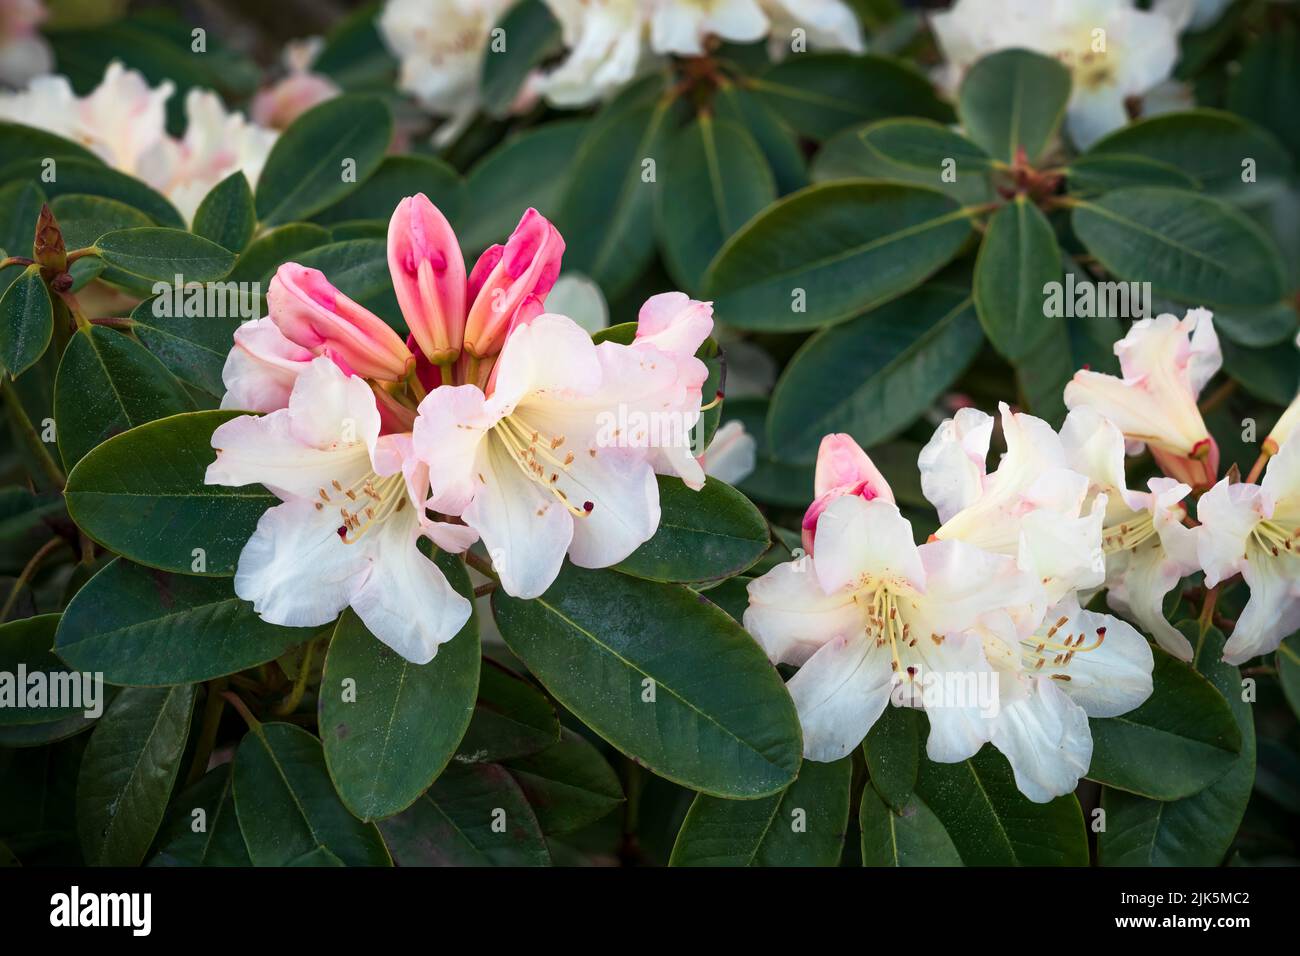 Rhododenderon flowers in a public garden in Abbotsford, British Columbia, Canada. Stock Photo